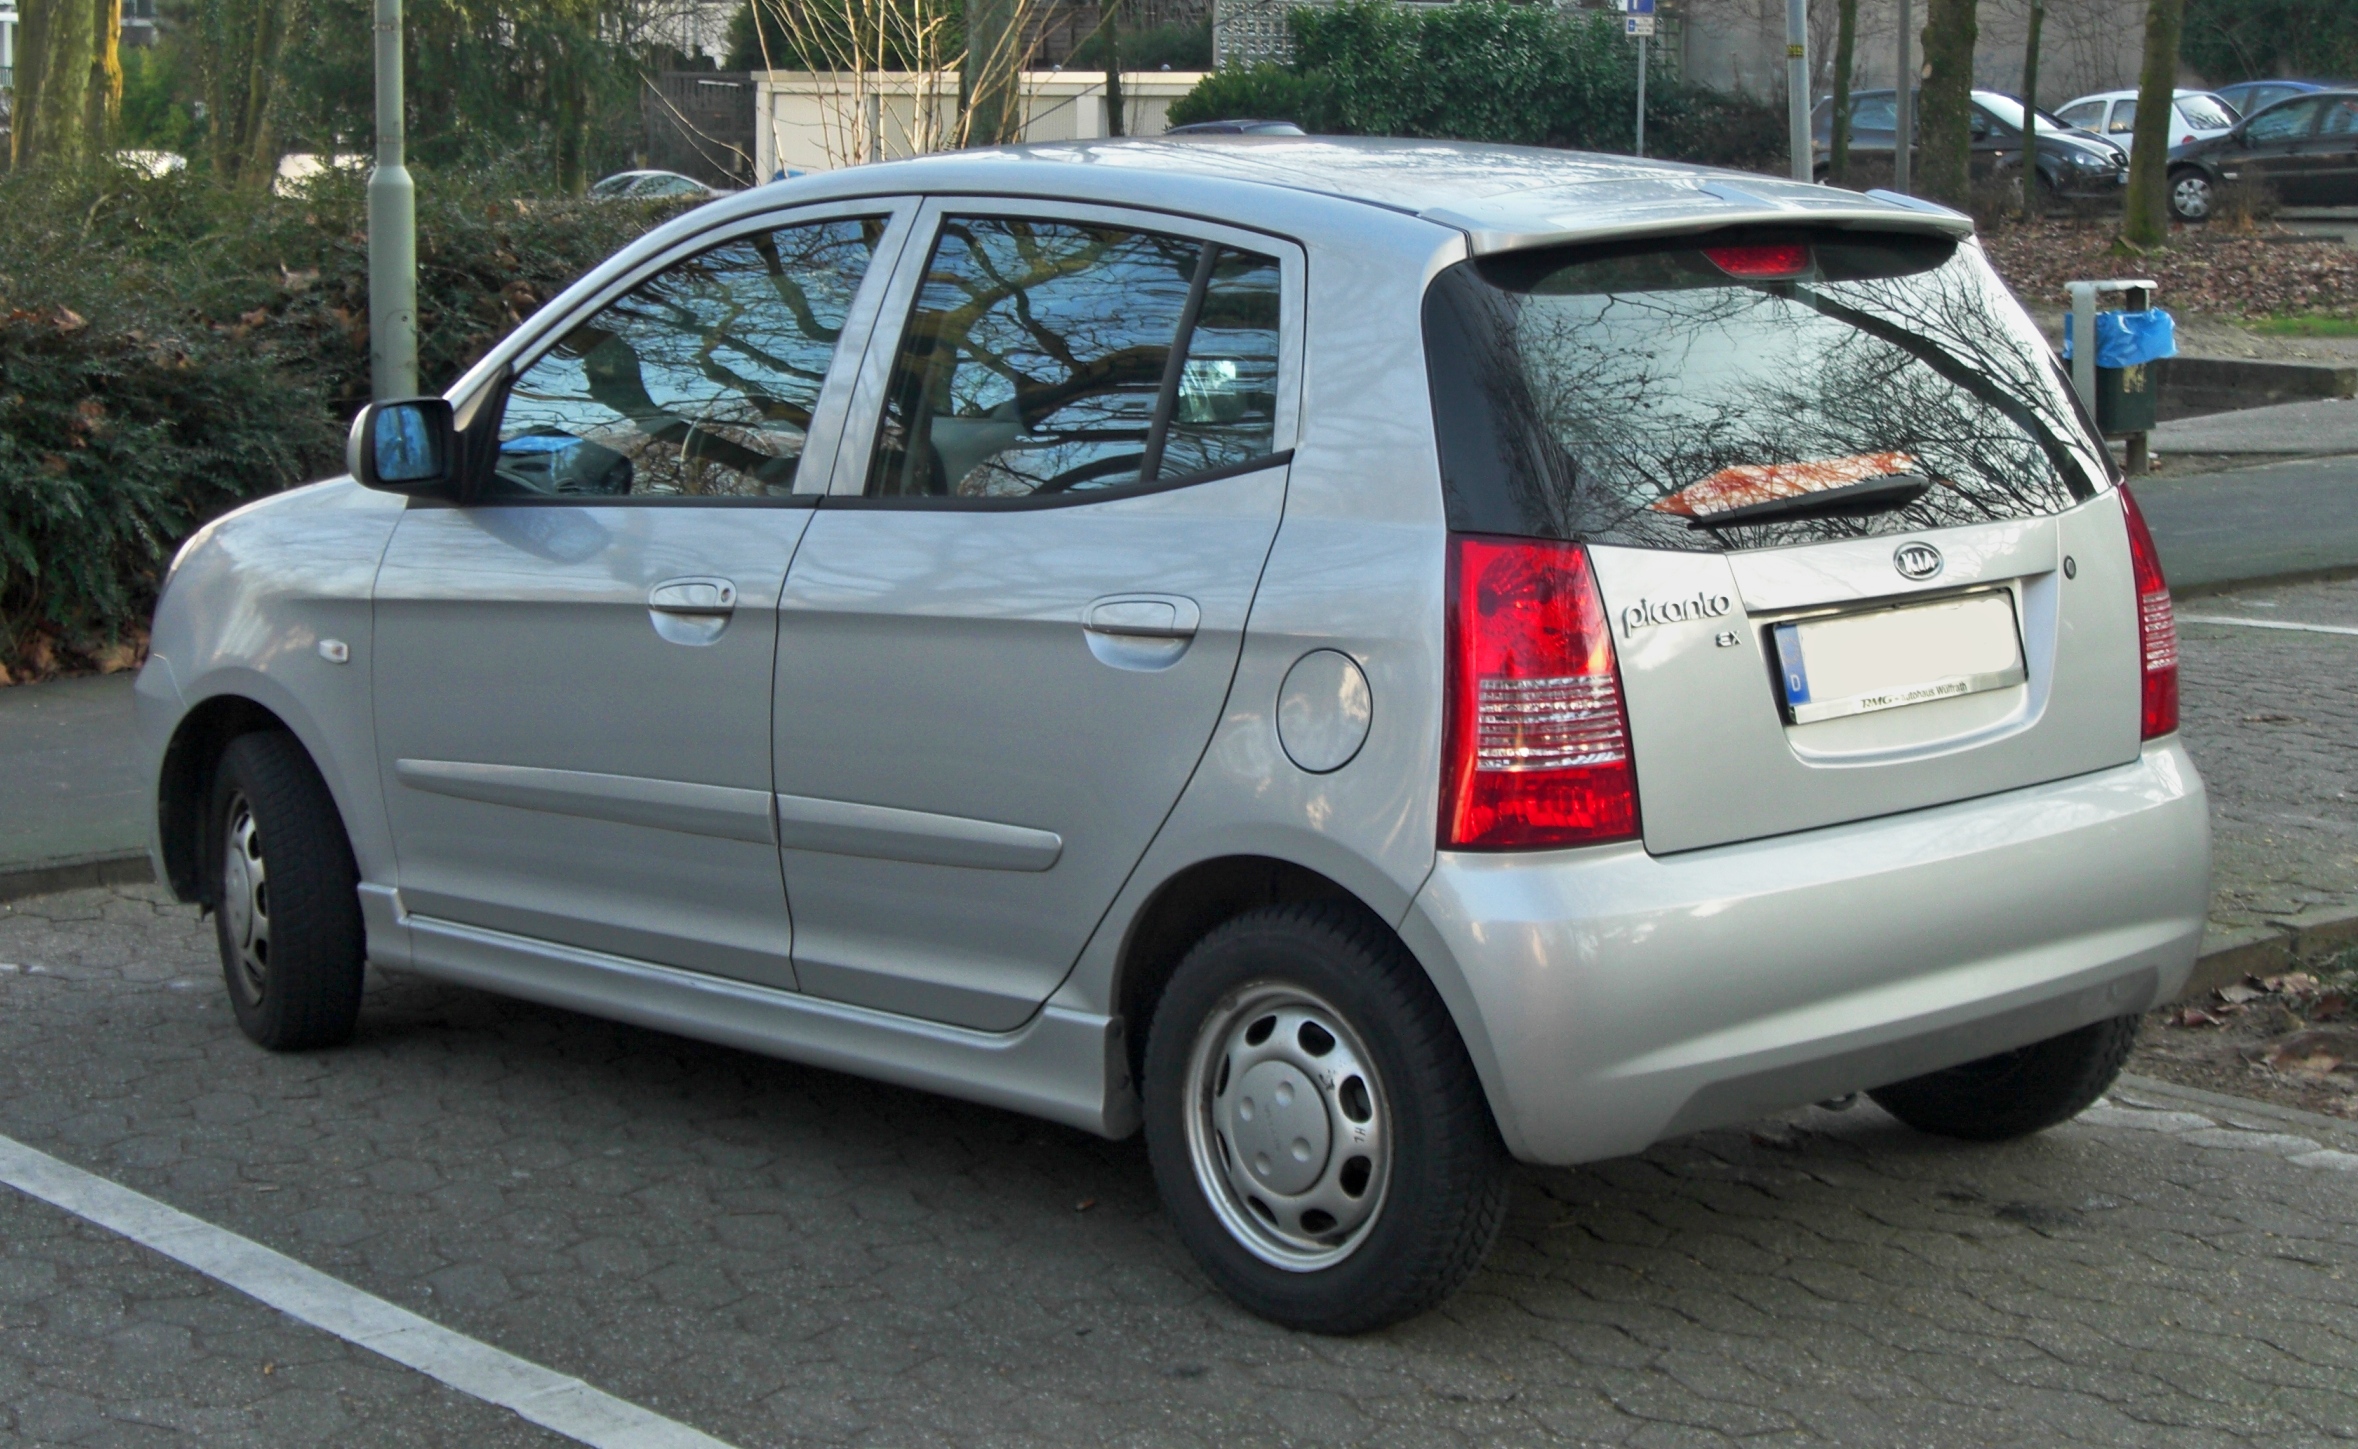 Kia Picanto 2009 Review, Amazing Pictures and Images